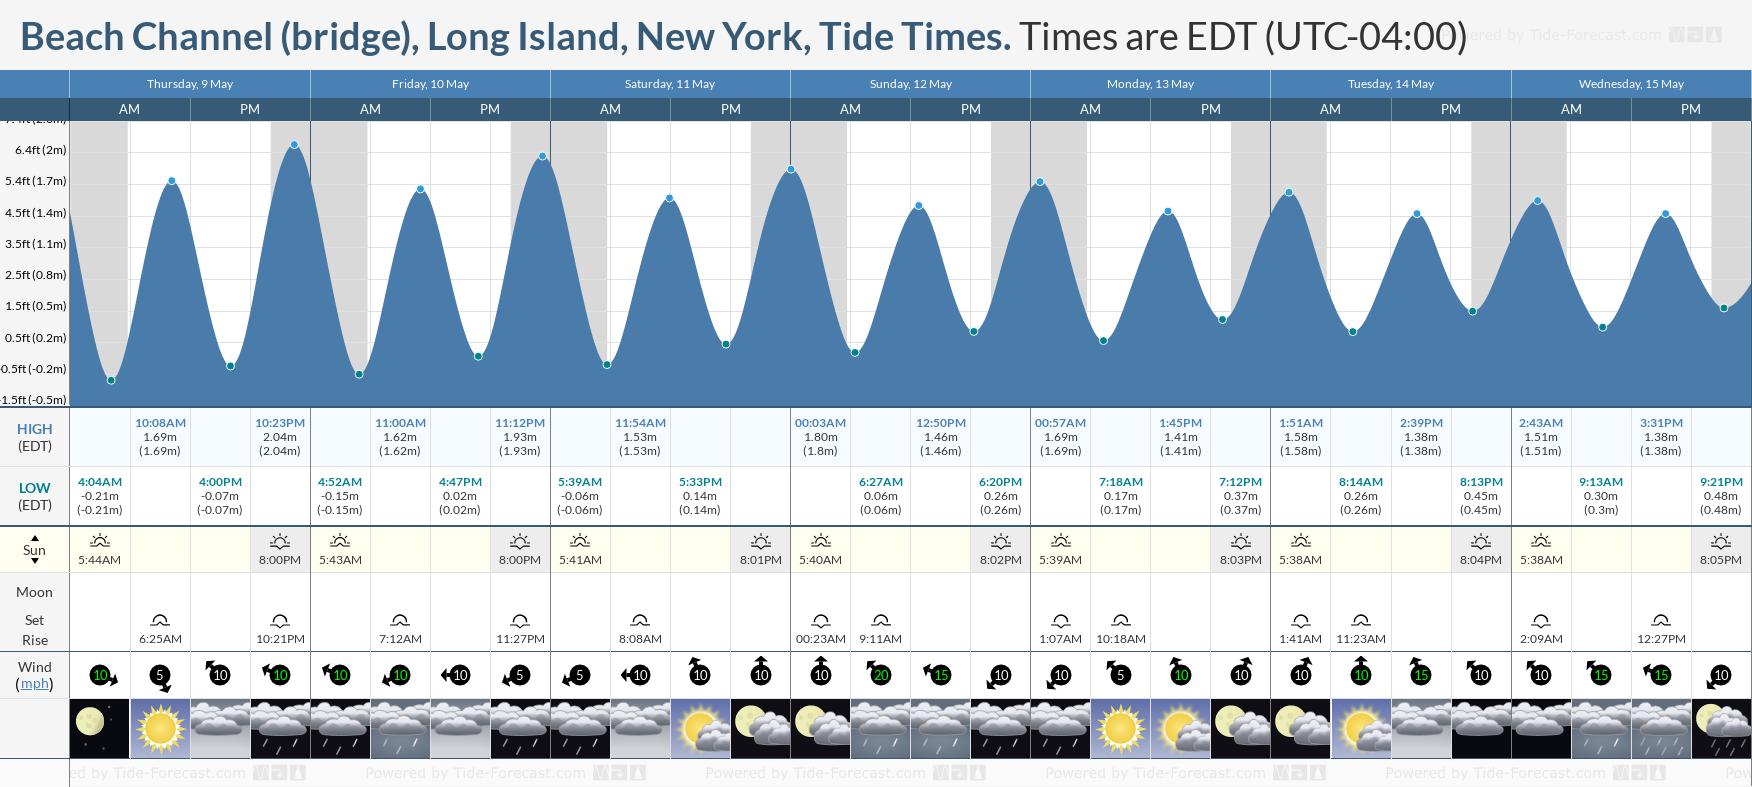 Beach Channel (bridge), Long Island, New York Tide Chart including high and low tide times for the next 7 days